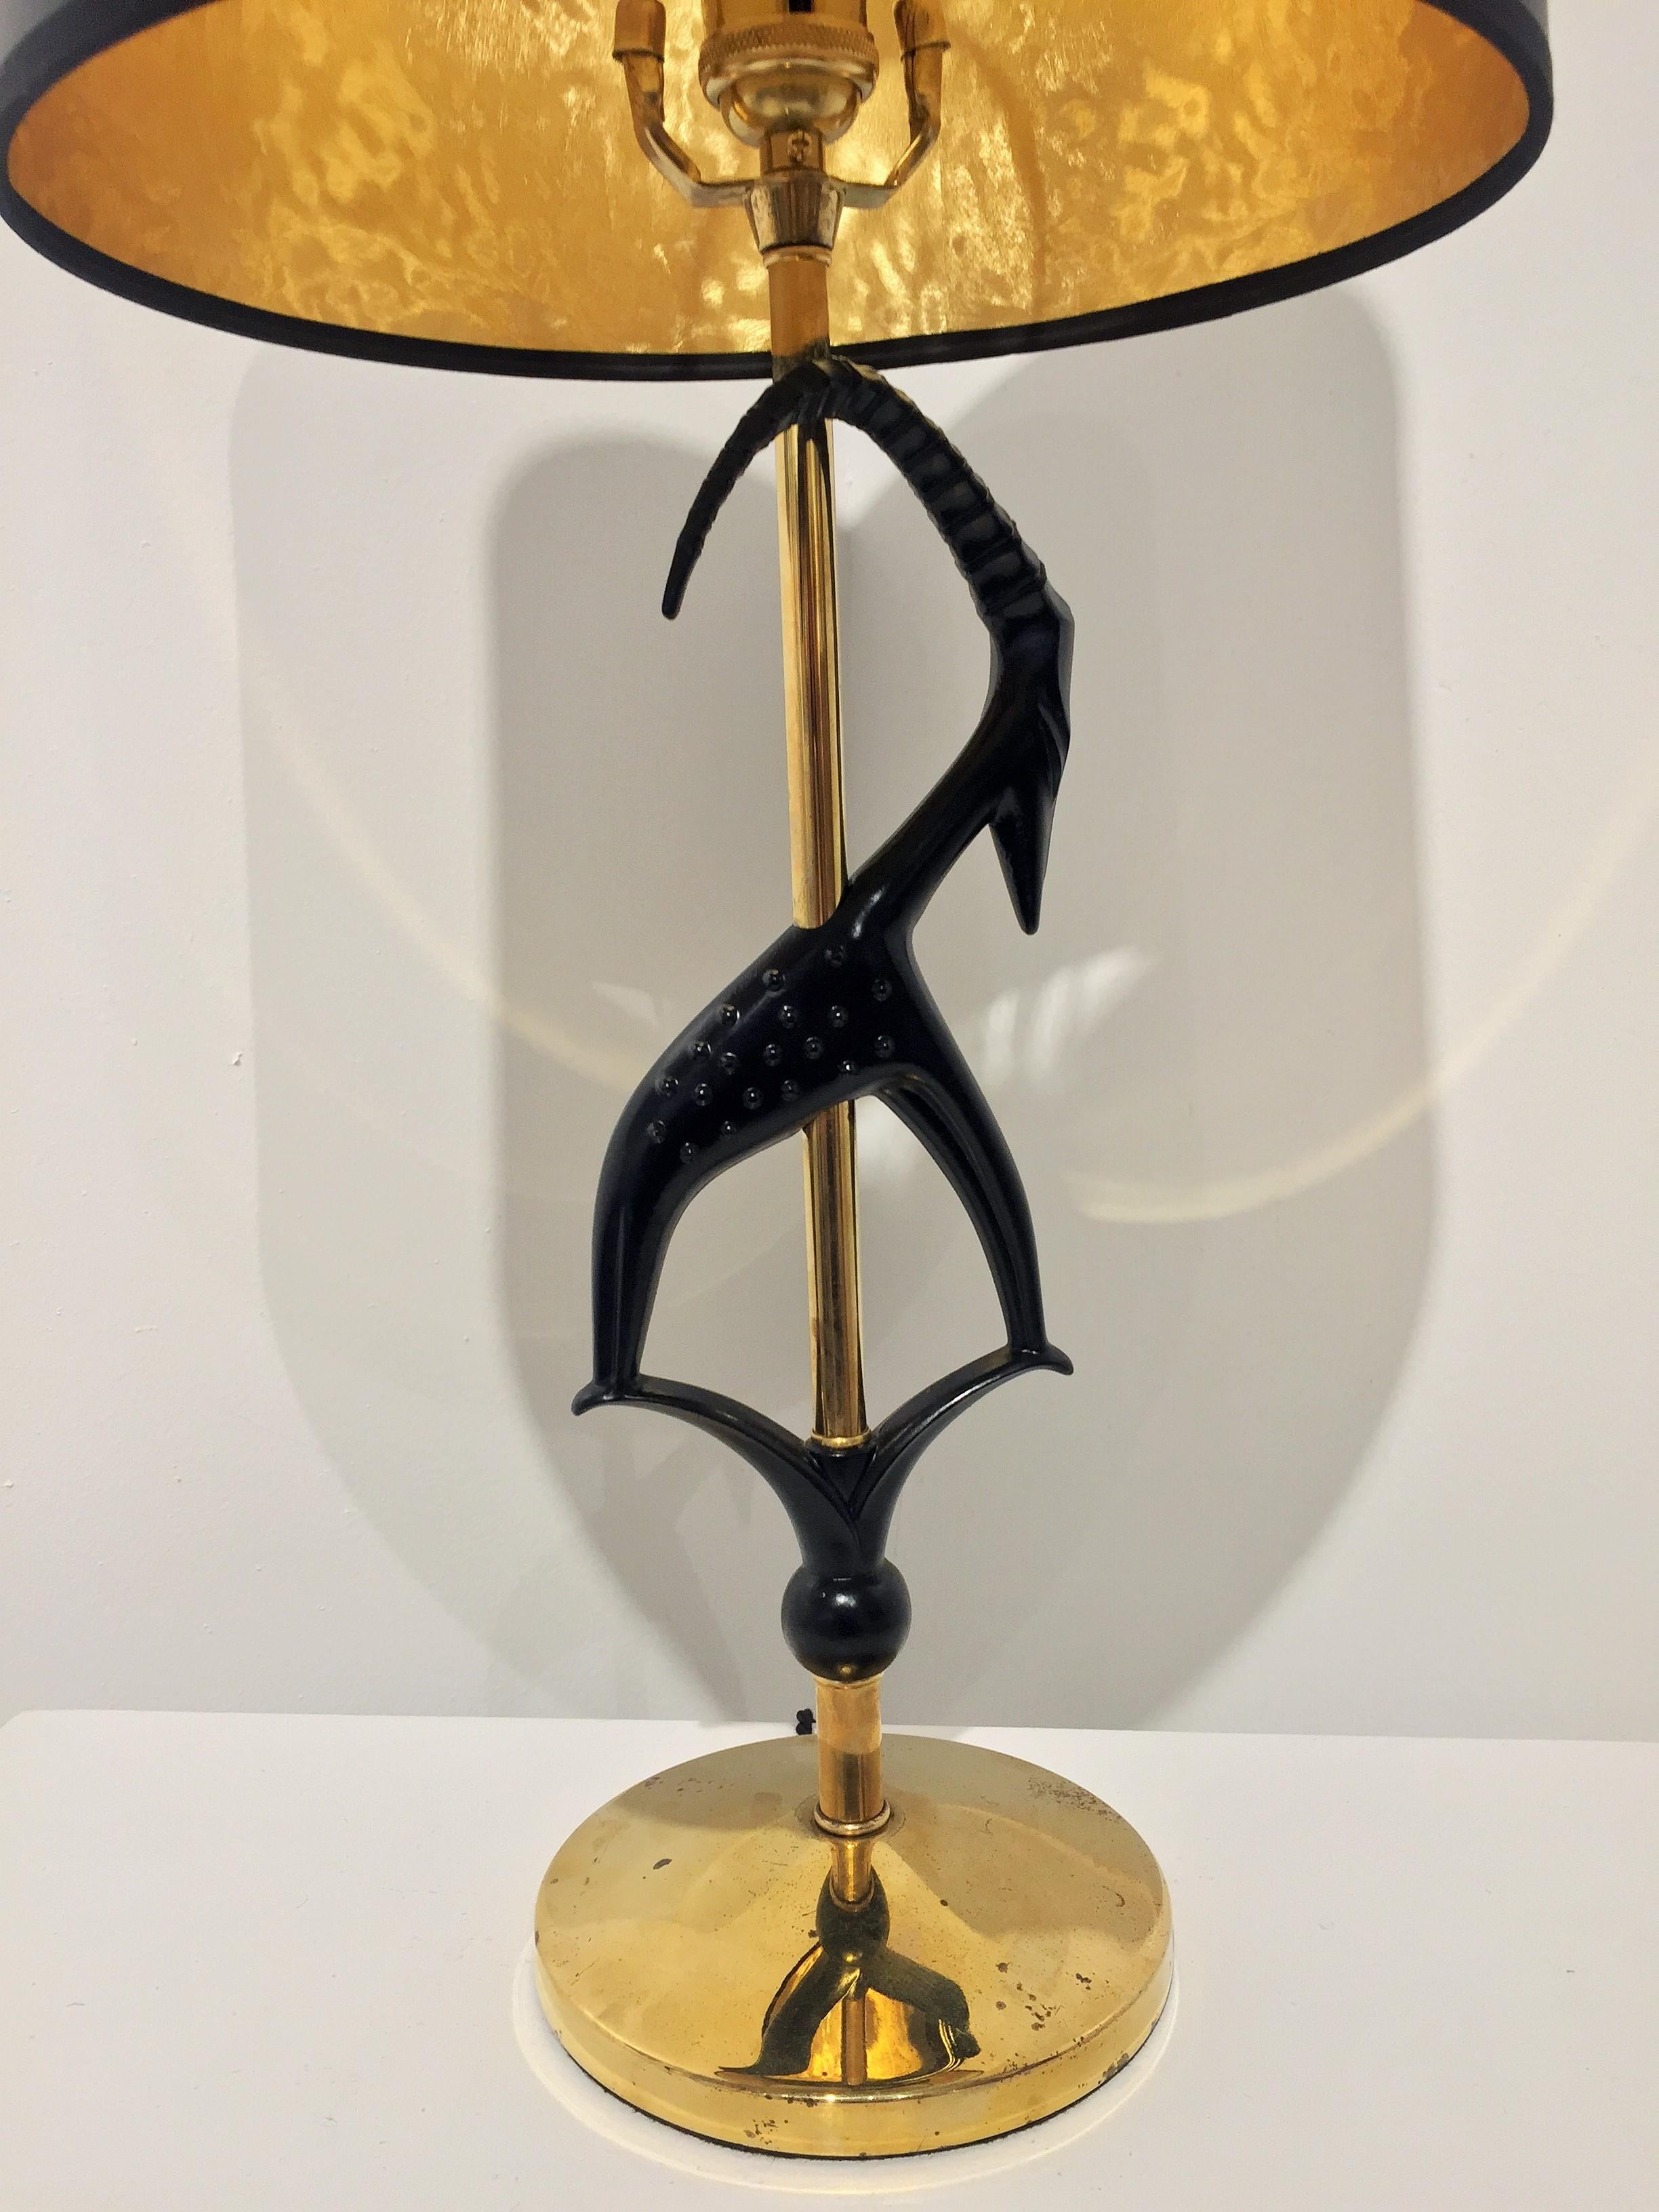 Midcentury gazelle lamp by Rembrandt Lamp Company. The lamp is newly rewired and updated with a brass socket, finial, and black paper shade (inside of shade is gold-like foil and due to its opaqueness, the light is directed up and down). The base